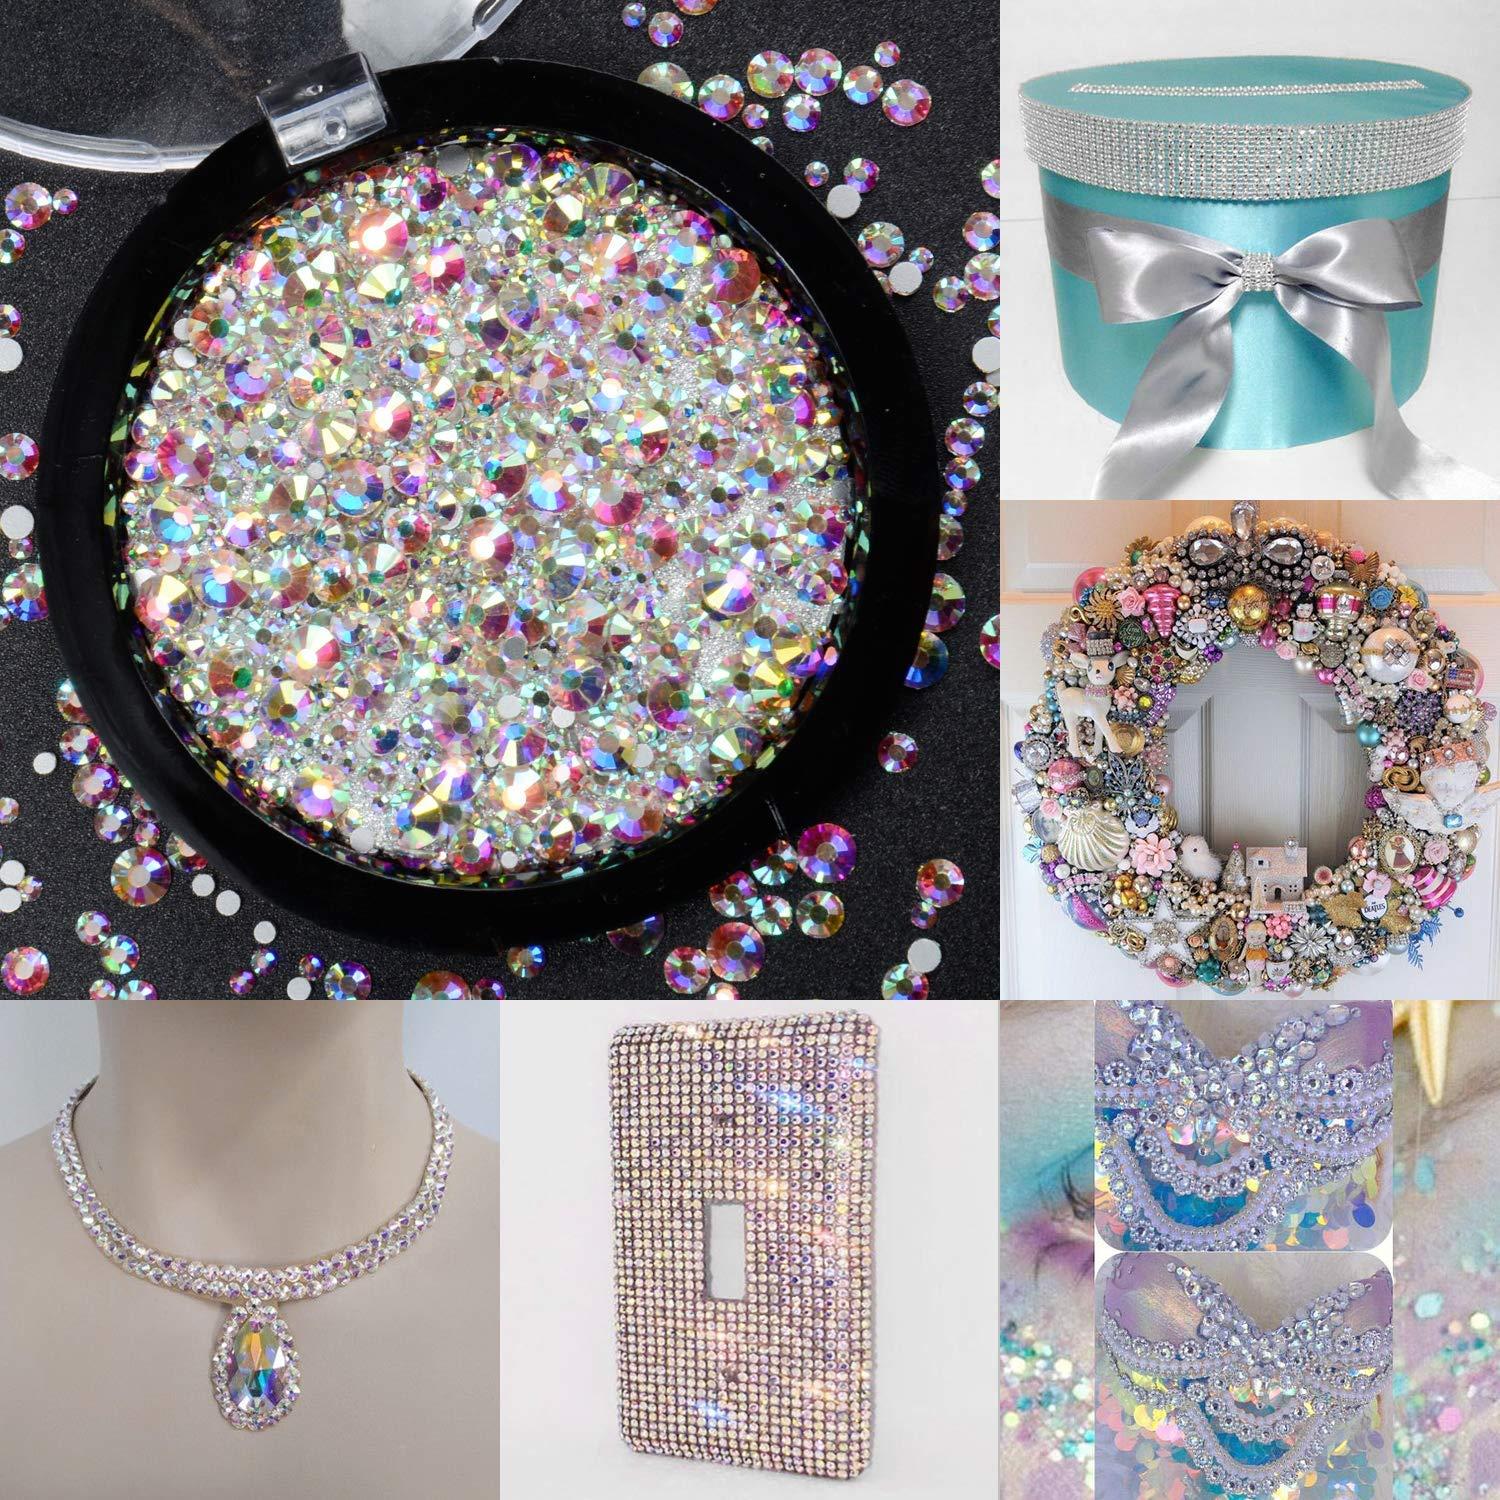  2592pcs Silver Flat Back Crystal Iridescent AB Rhinestones  Round Beads Gem Jewel Pearls set, 9 Mix Sizes for 3D Nail Art DIY Makeup  Craft Clothes Shoes Phone Case Decoration : Beauty